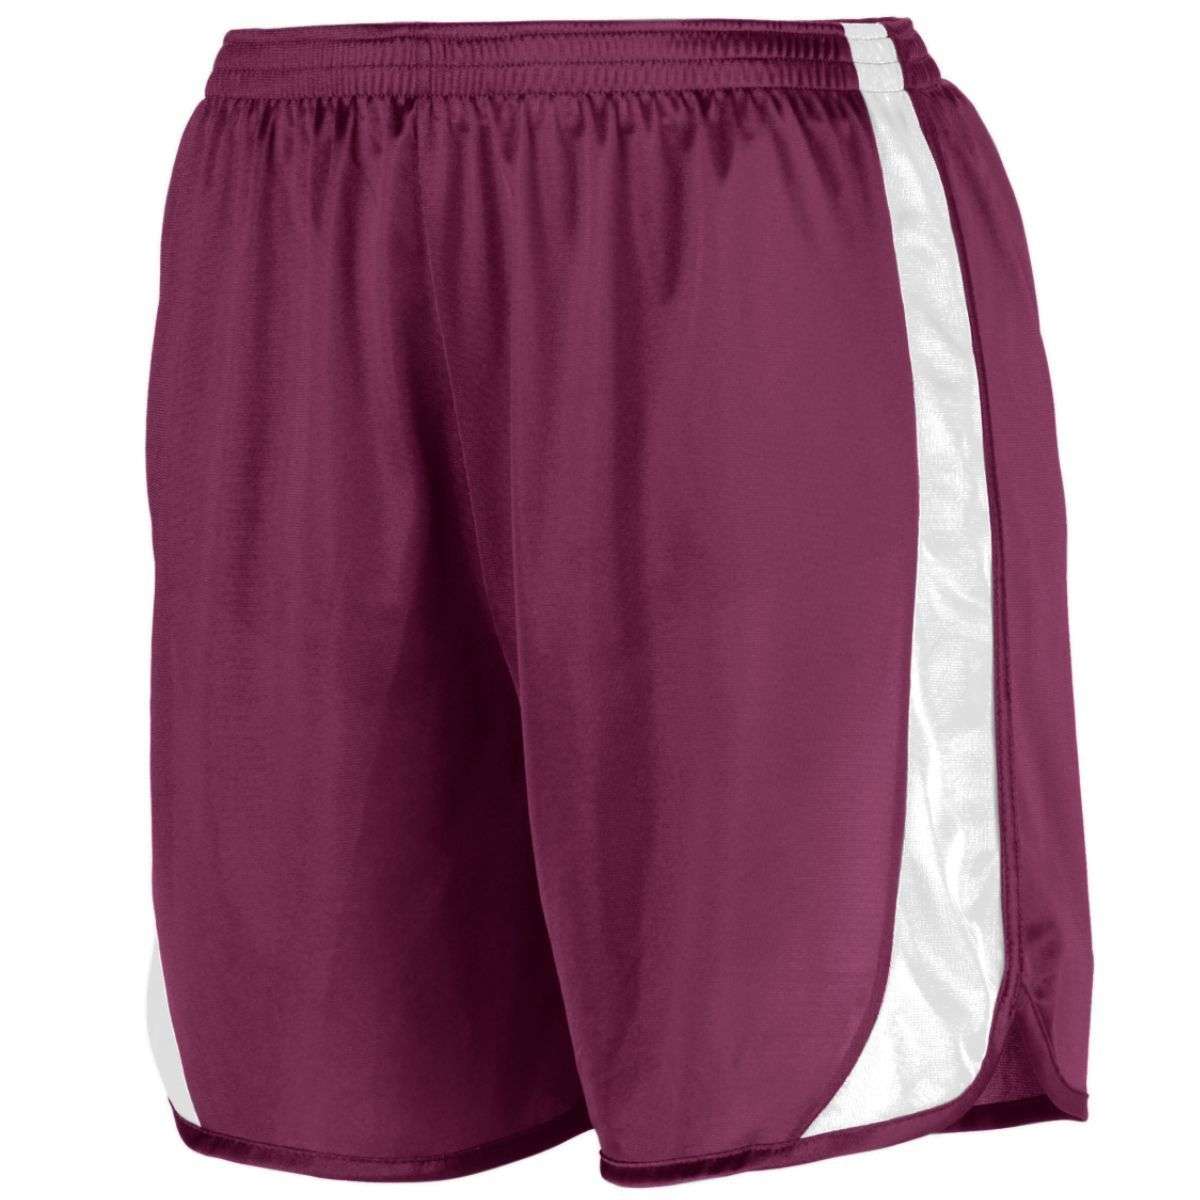 Selected Color is Maroon/White